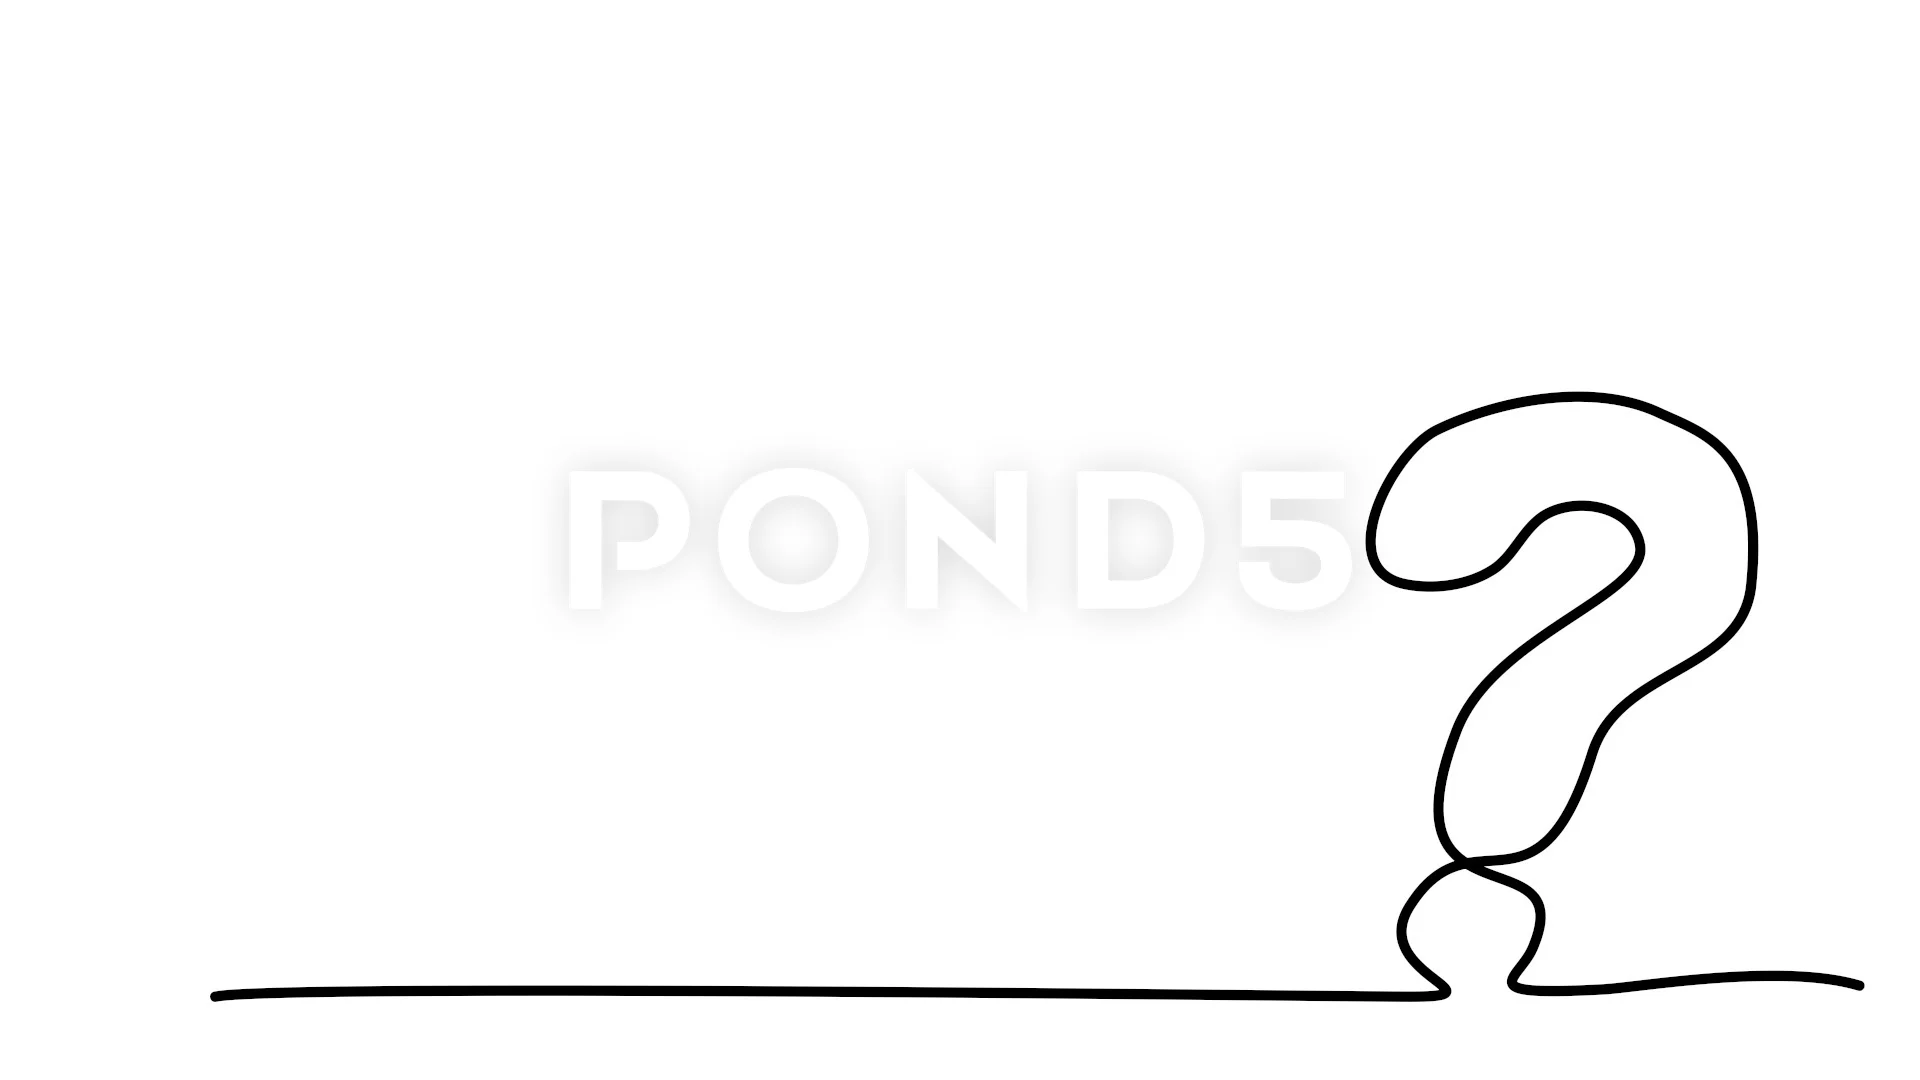 Question Mark Drawn Stock Illustrations  6736 Question Mark Drawn Stock  Illustrations Vectors  Clipart  Dreamstime